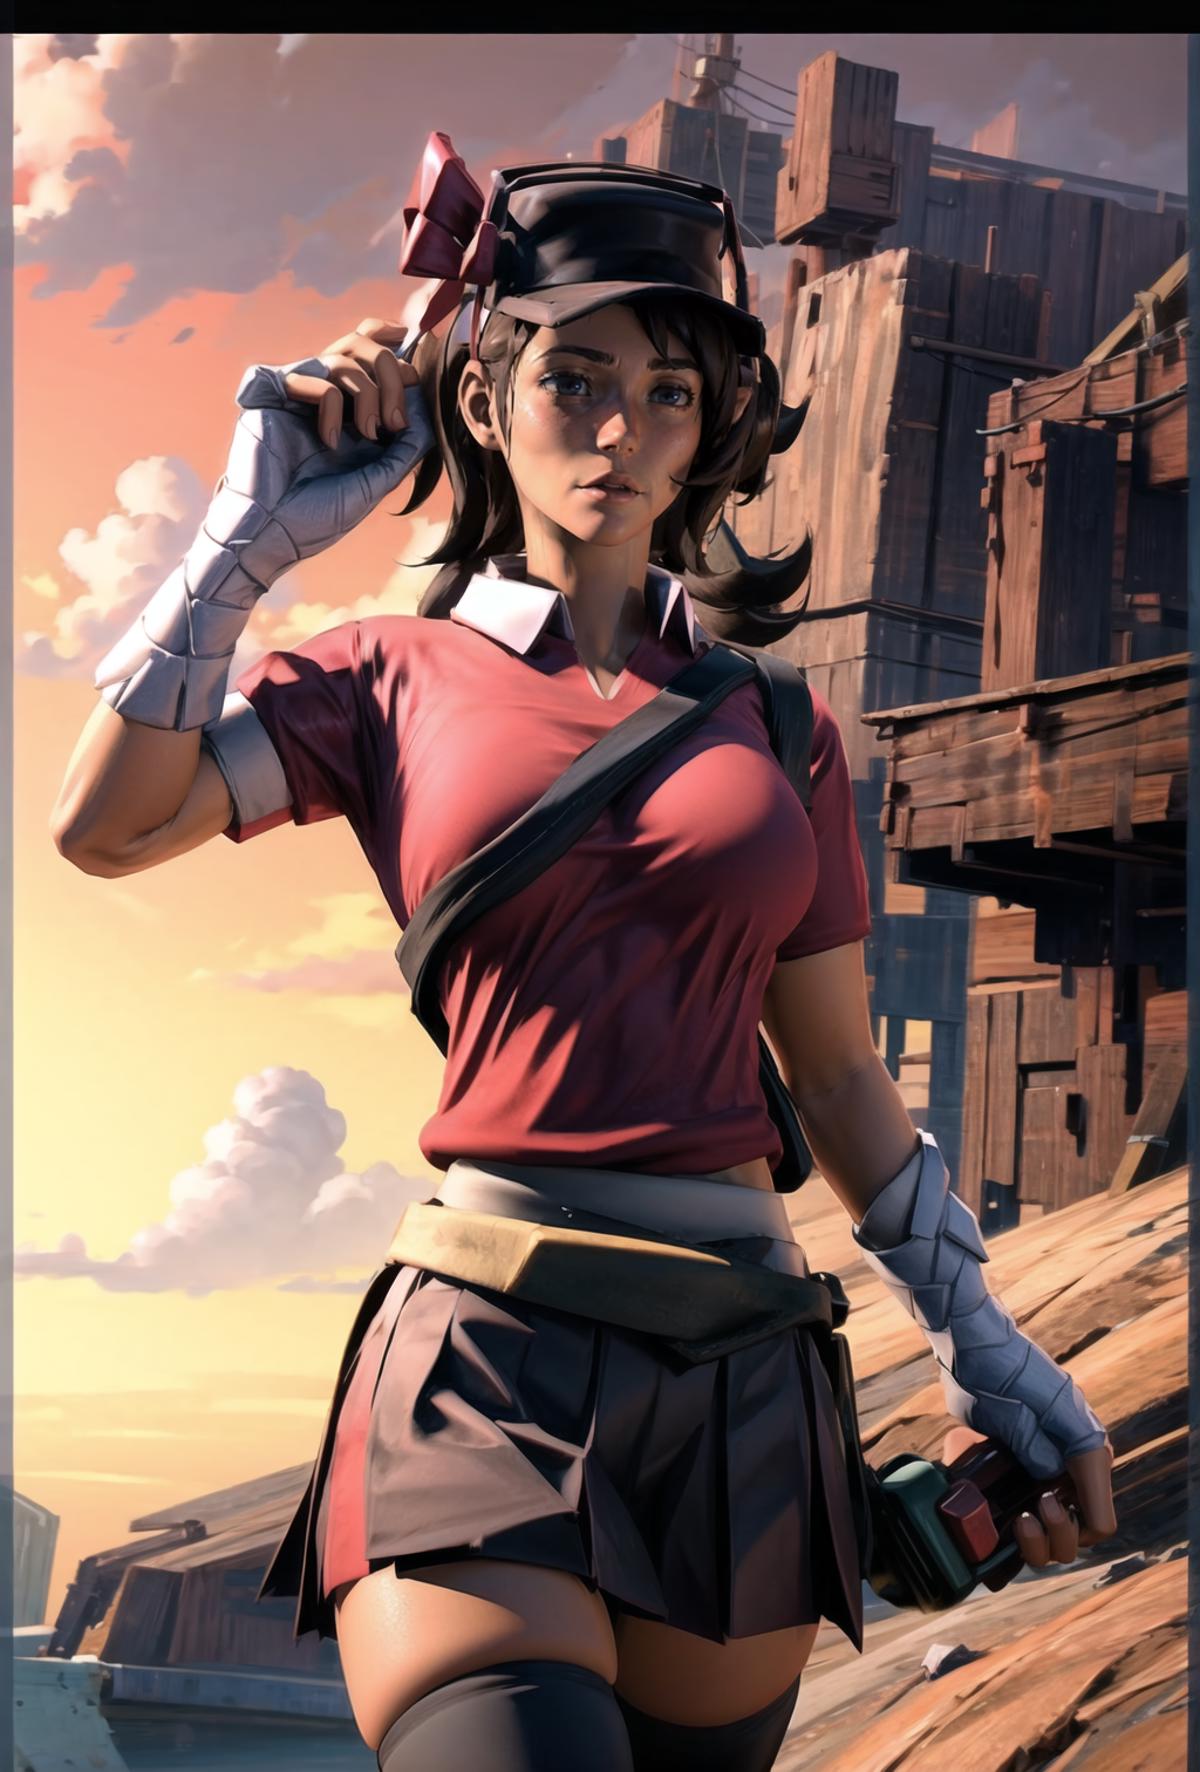 Femscout - Team Fortress 2 image by Fenchurch